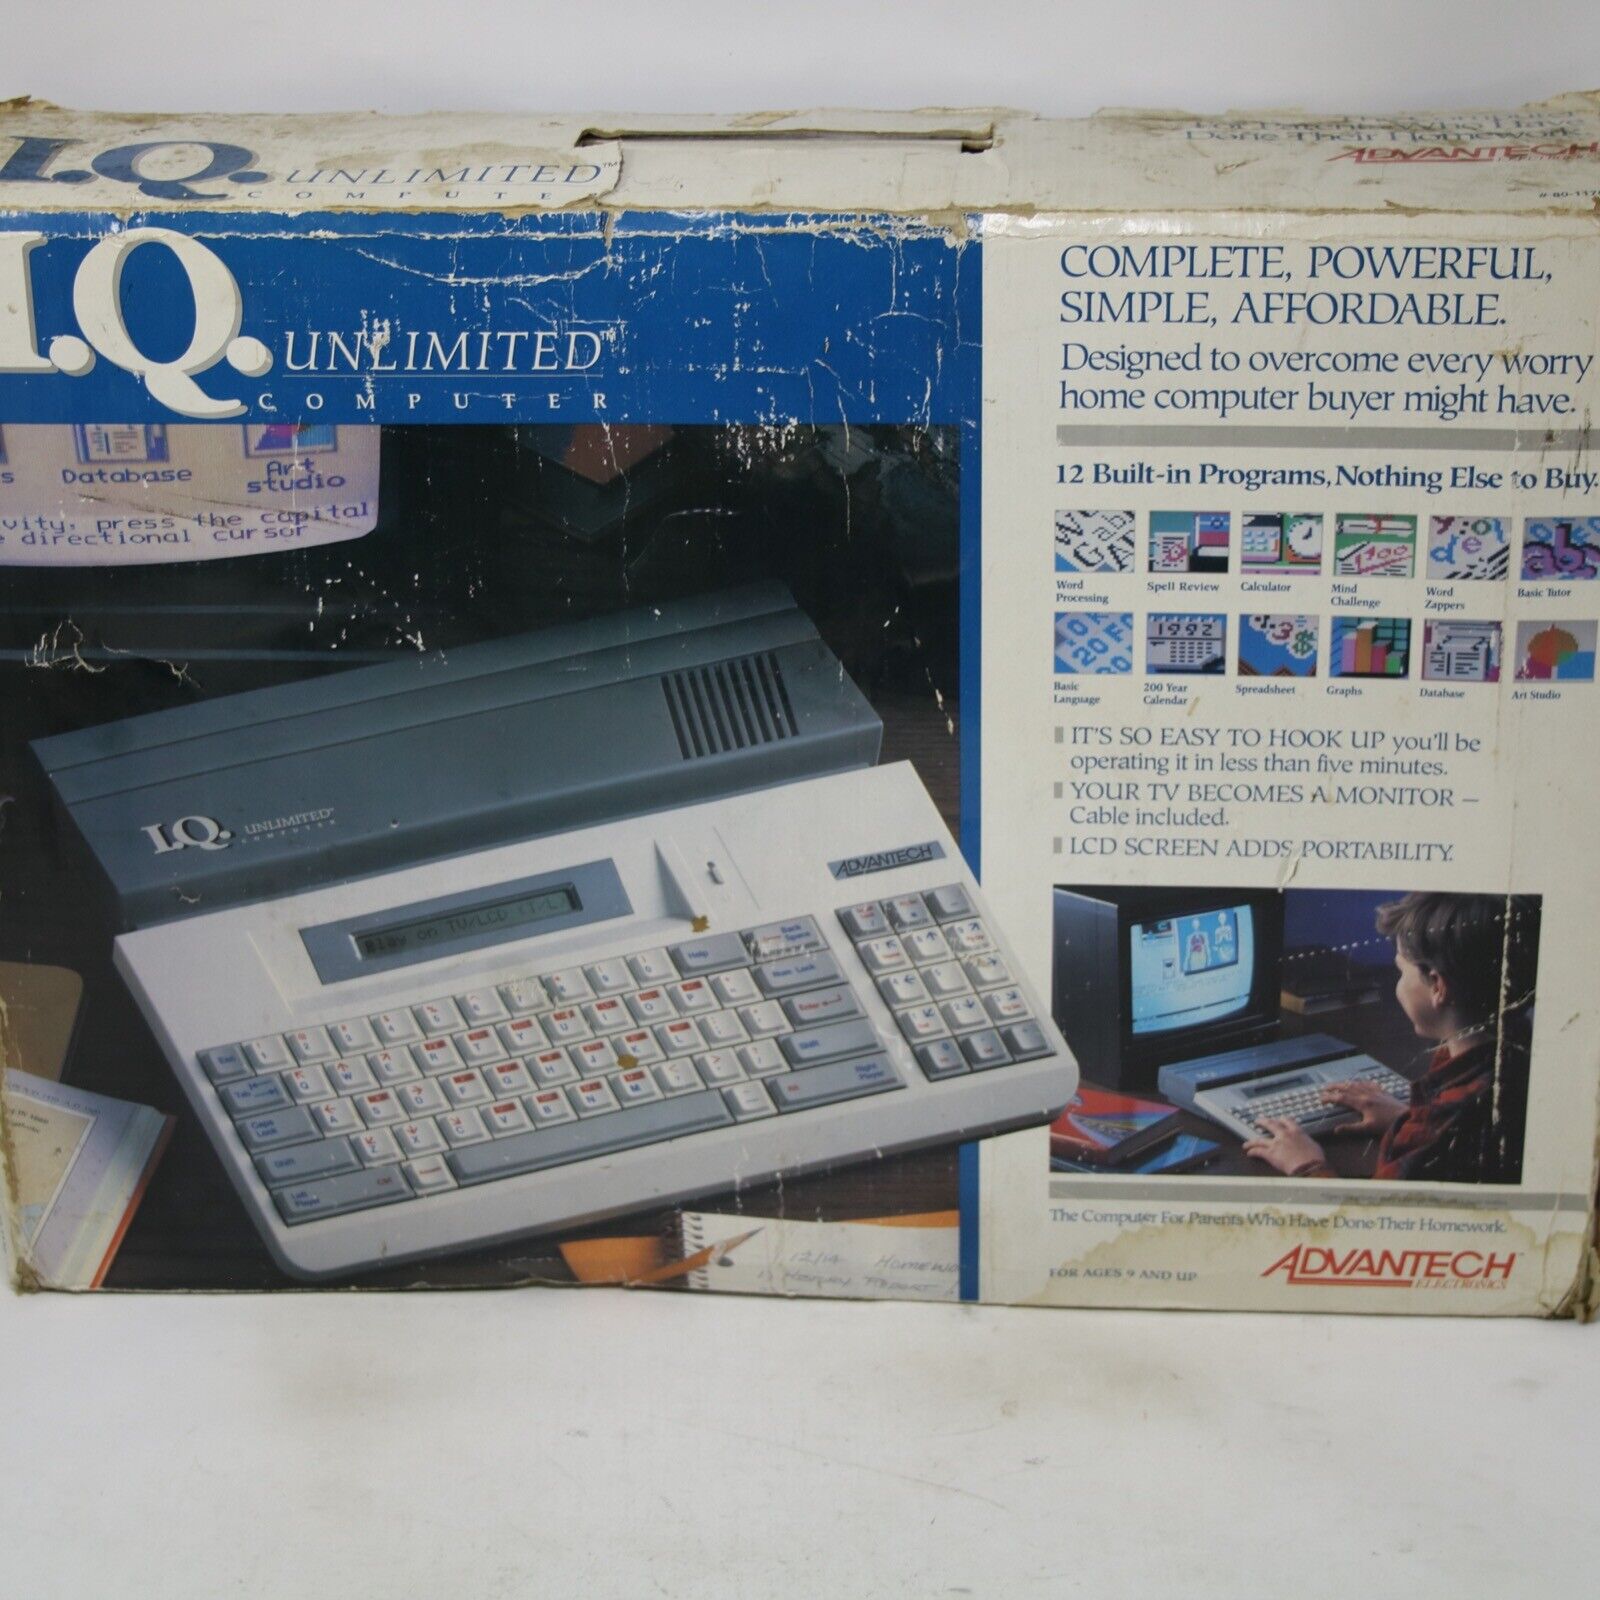 Vintage 1991 VTech IQ Unlimited Computer Complete In Box